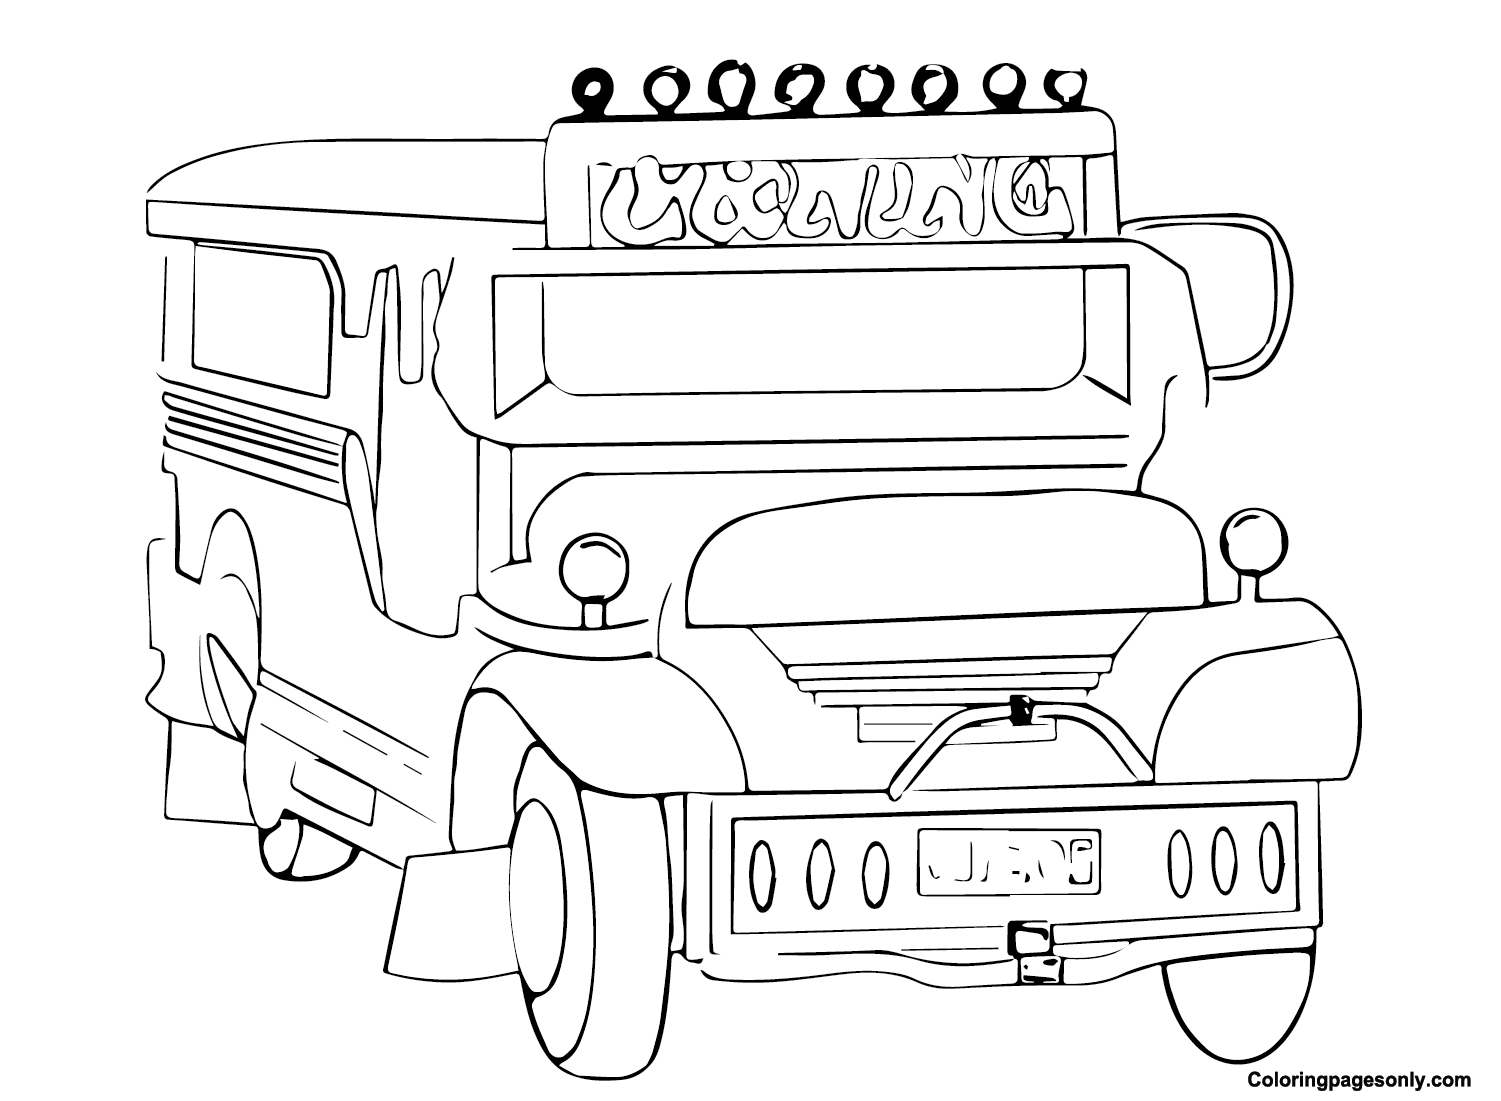 Jeepney coloring pages